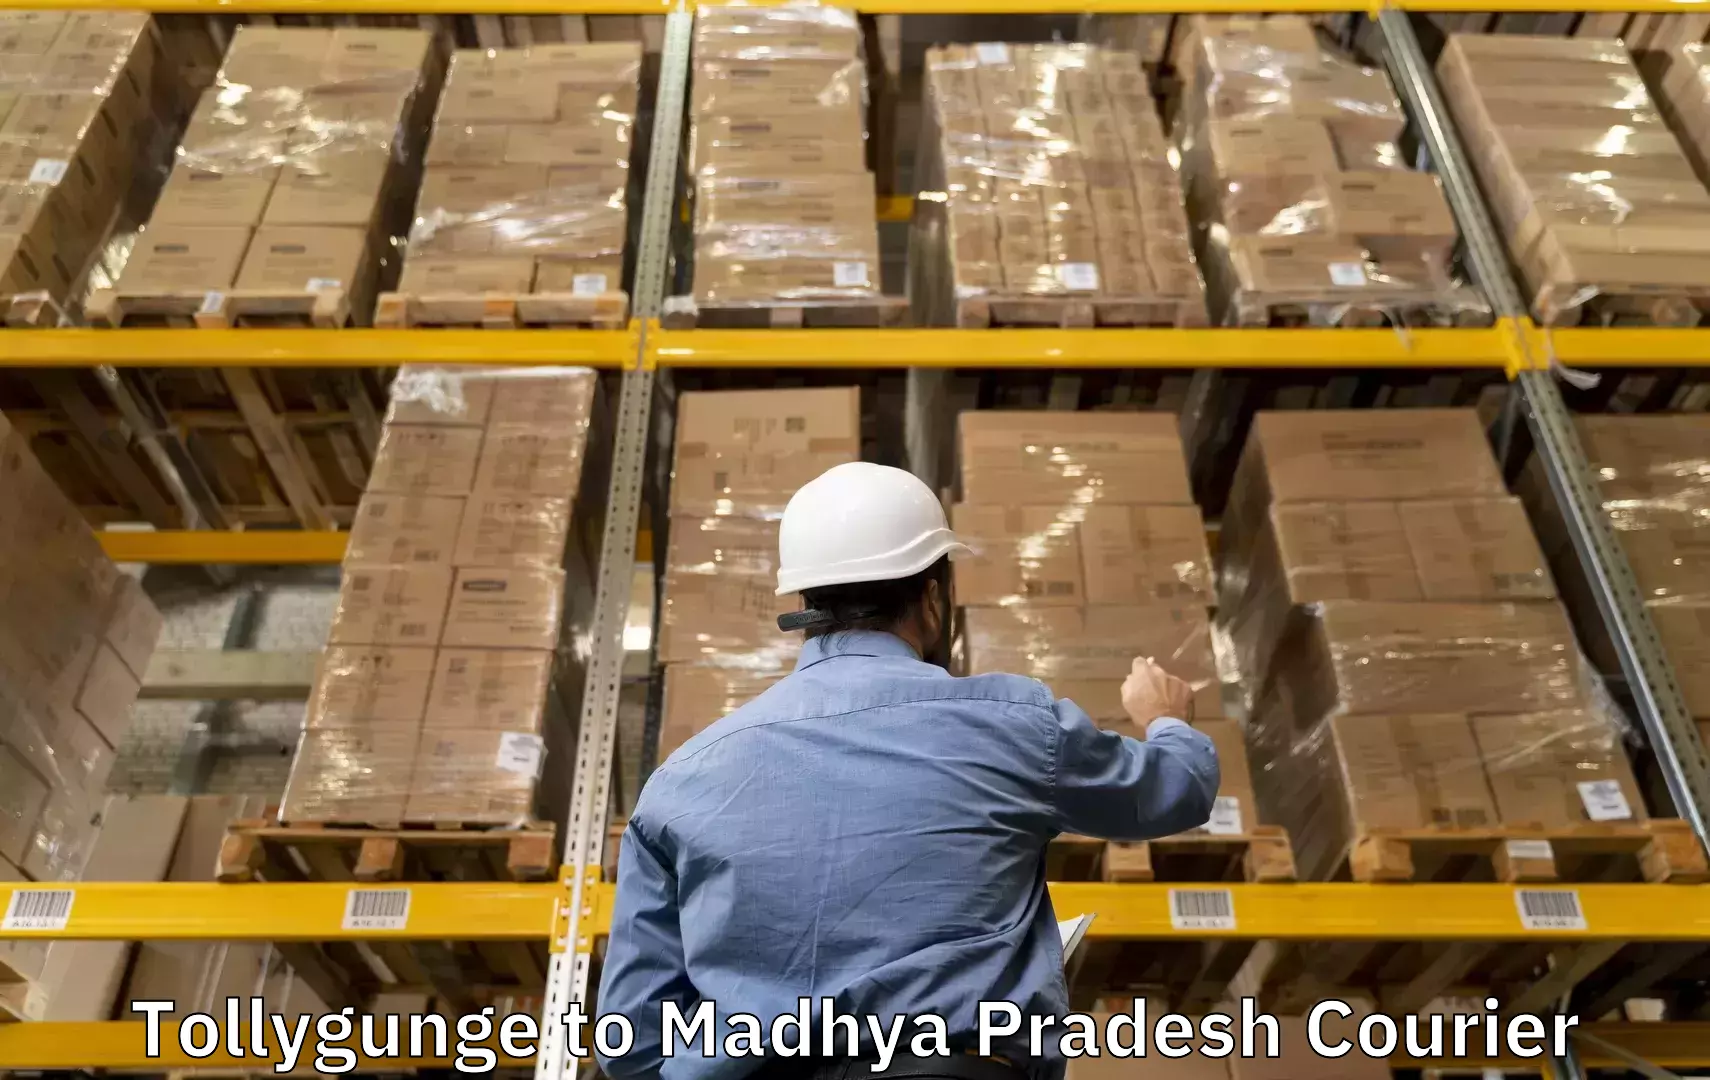 Personal effects shipping Tollygunge to Jhunku